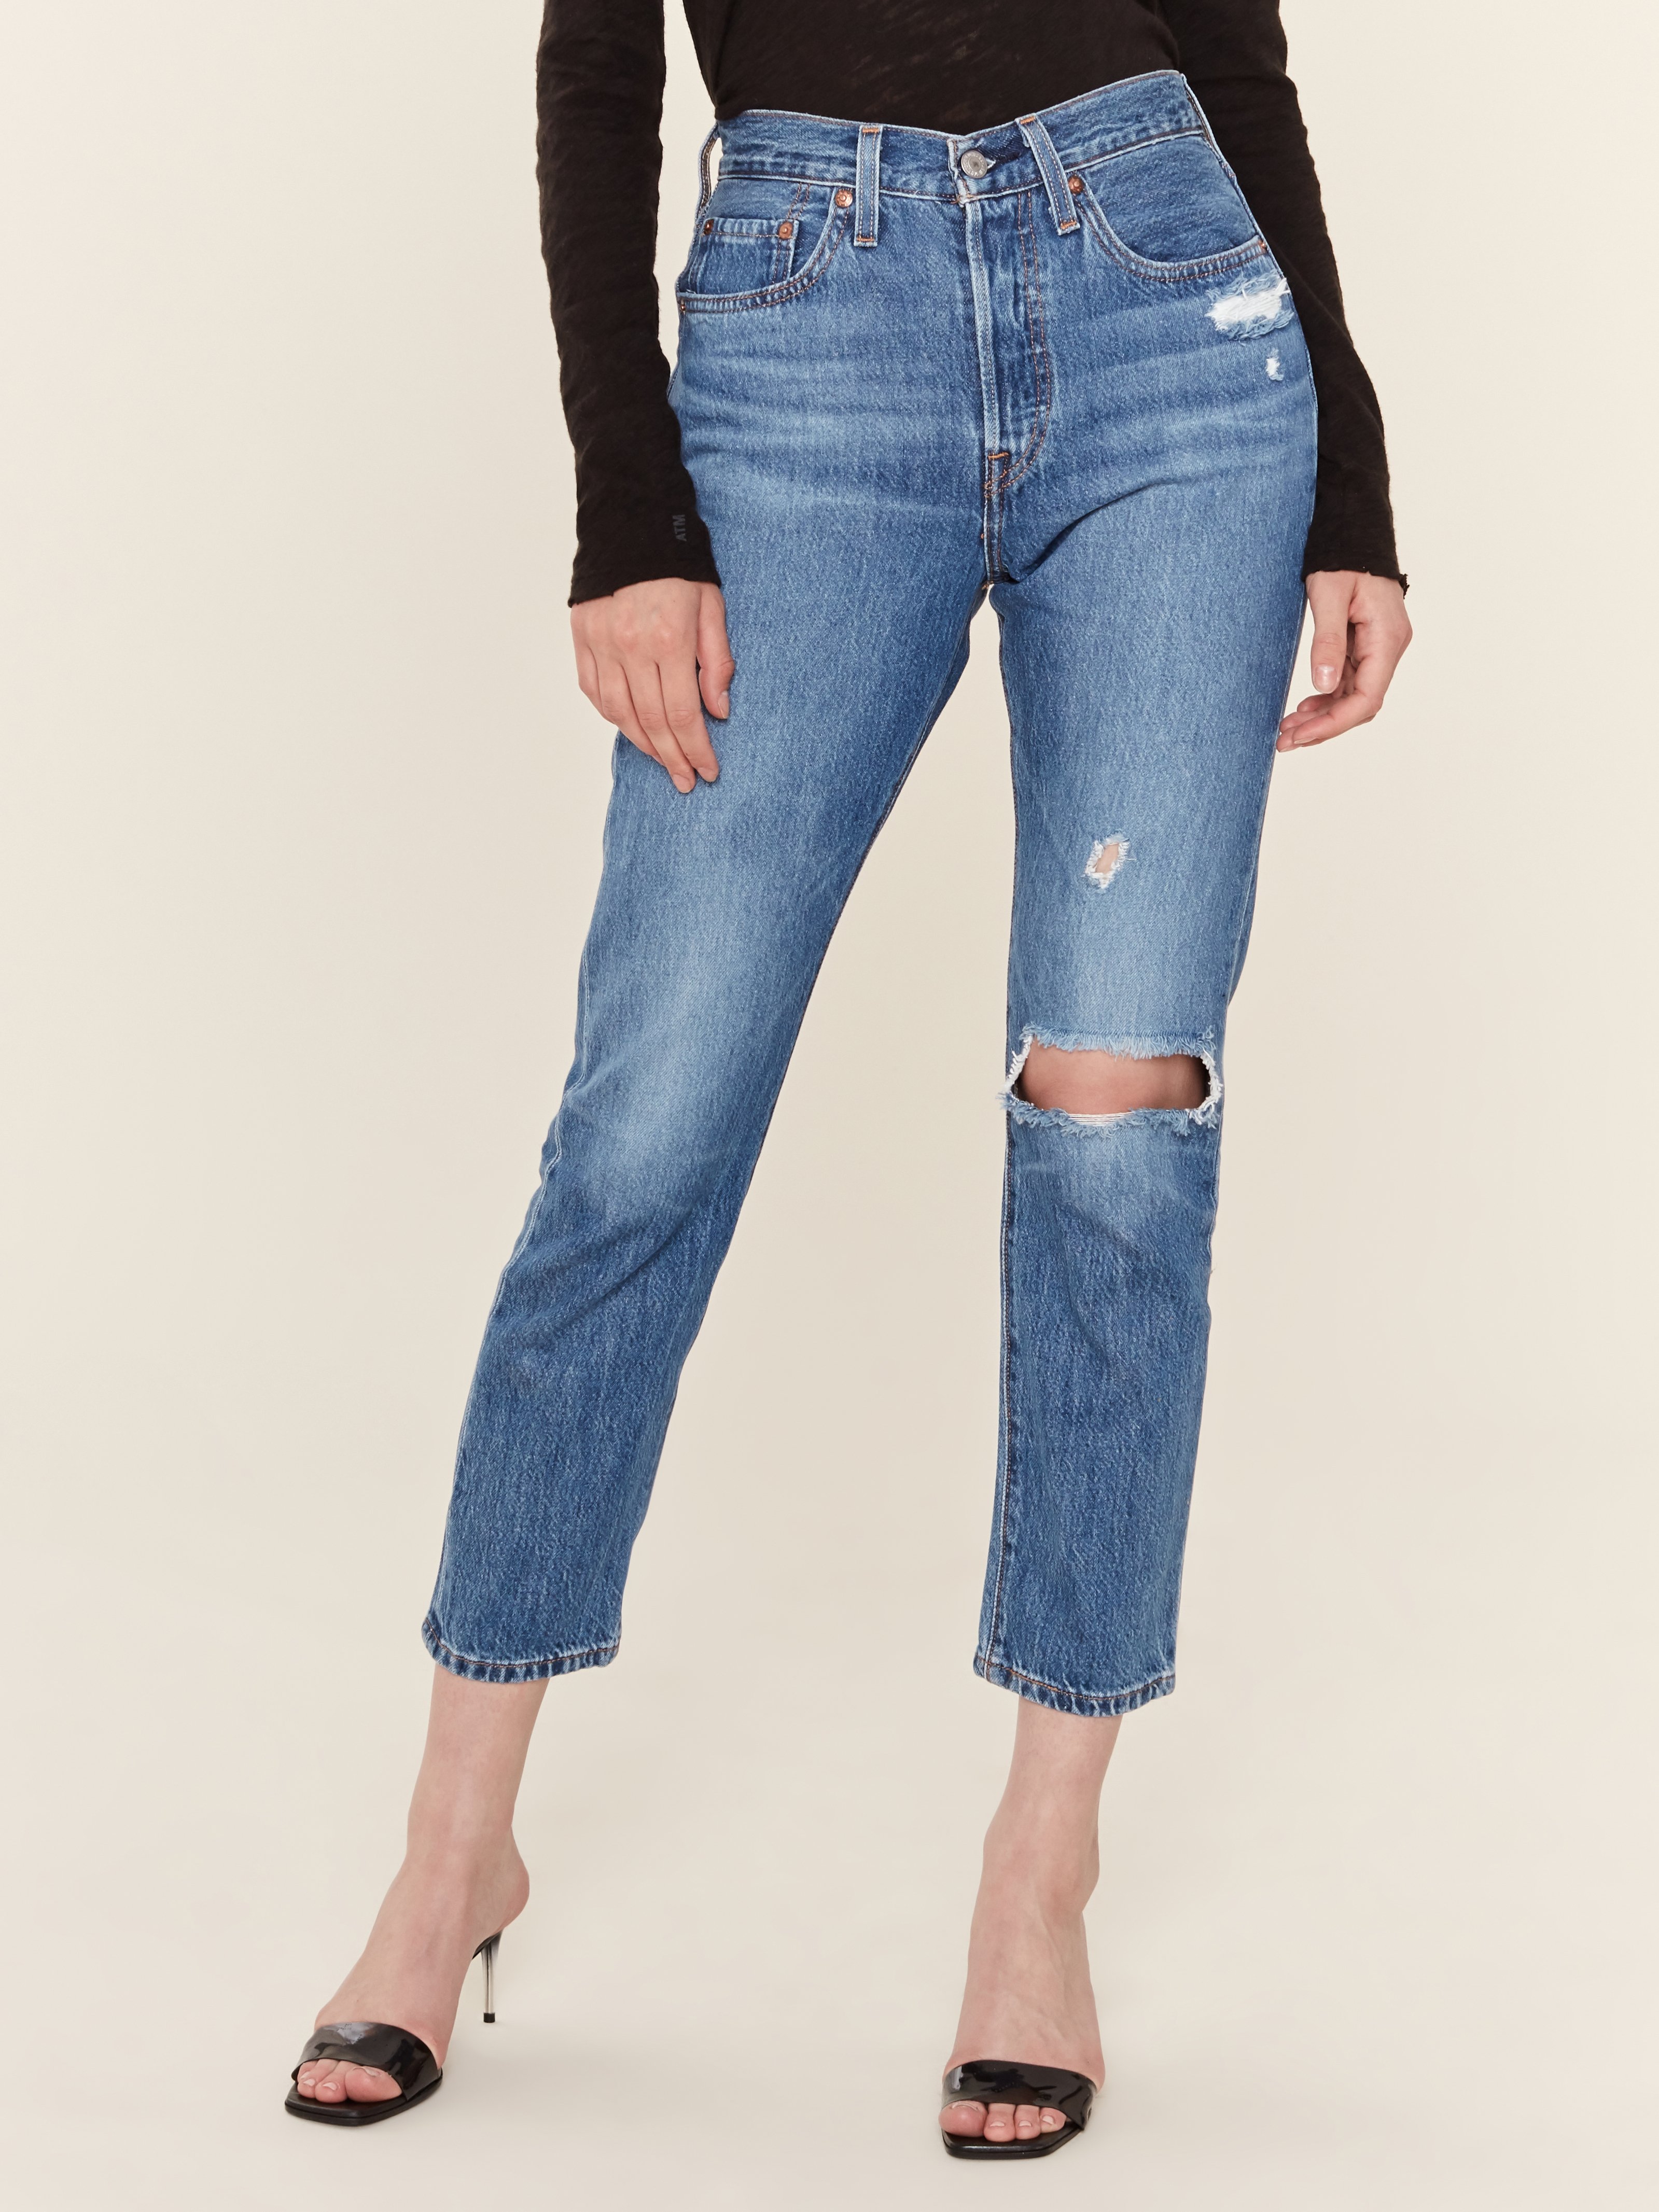 jeans levis high rise skinny